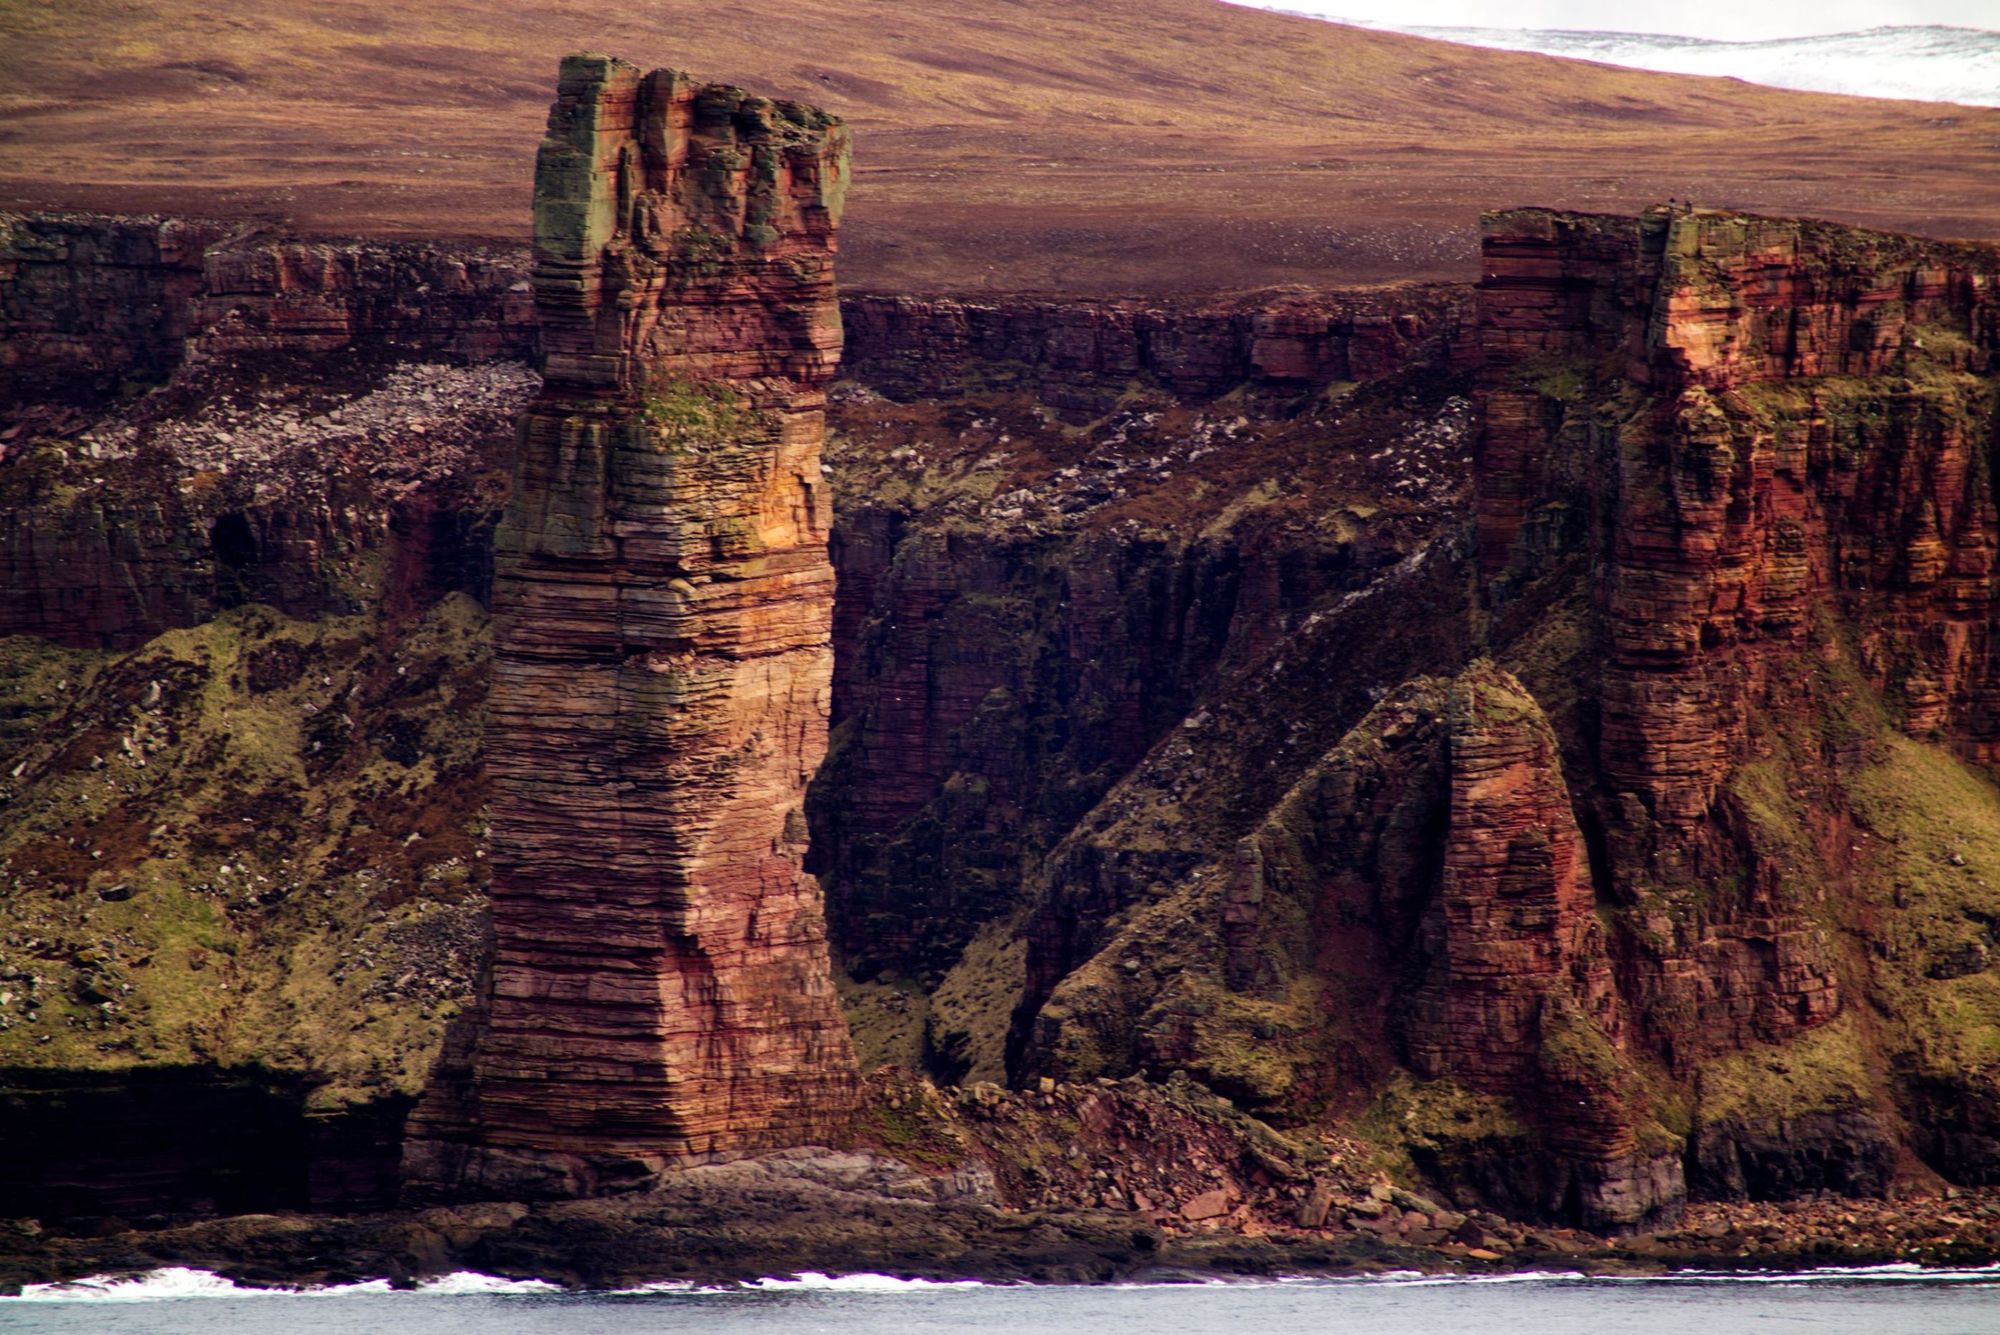 The Old Man of Hoy, a famous sea stack off the island of Hoy, which is part of the Orkney Islands. Photo: Getty